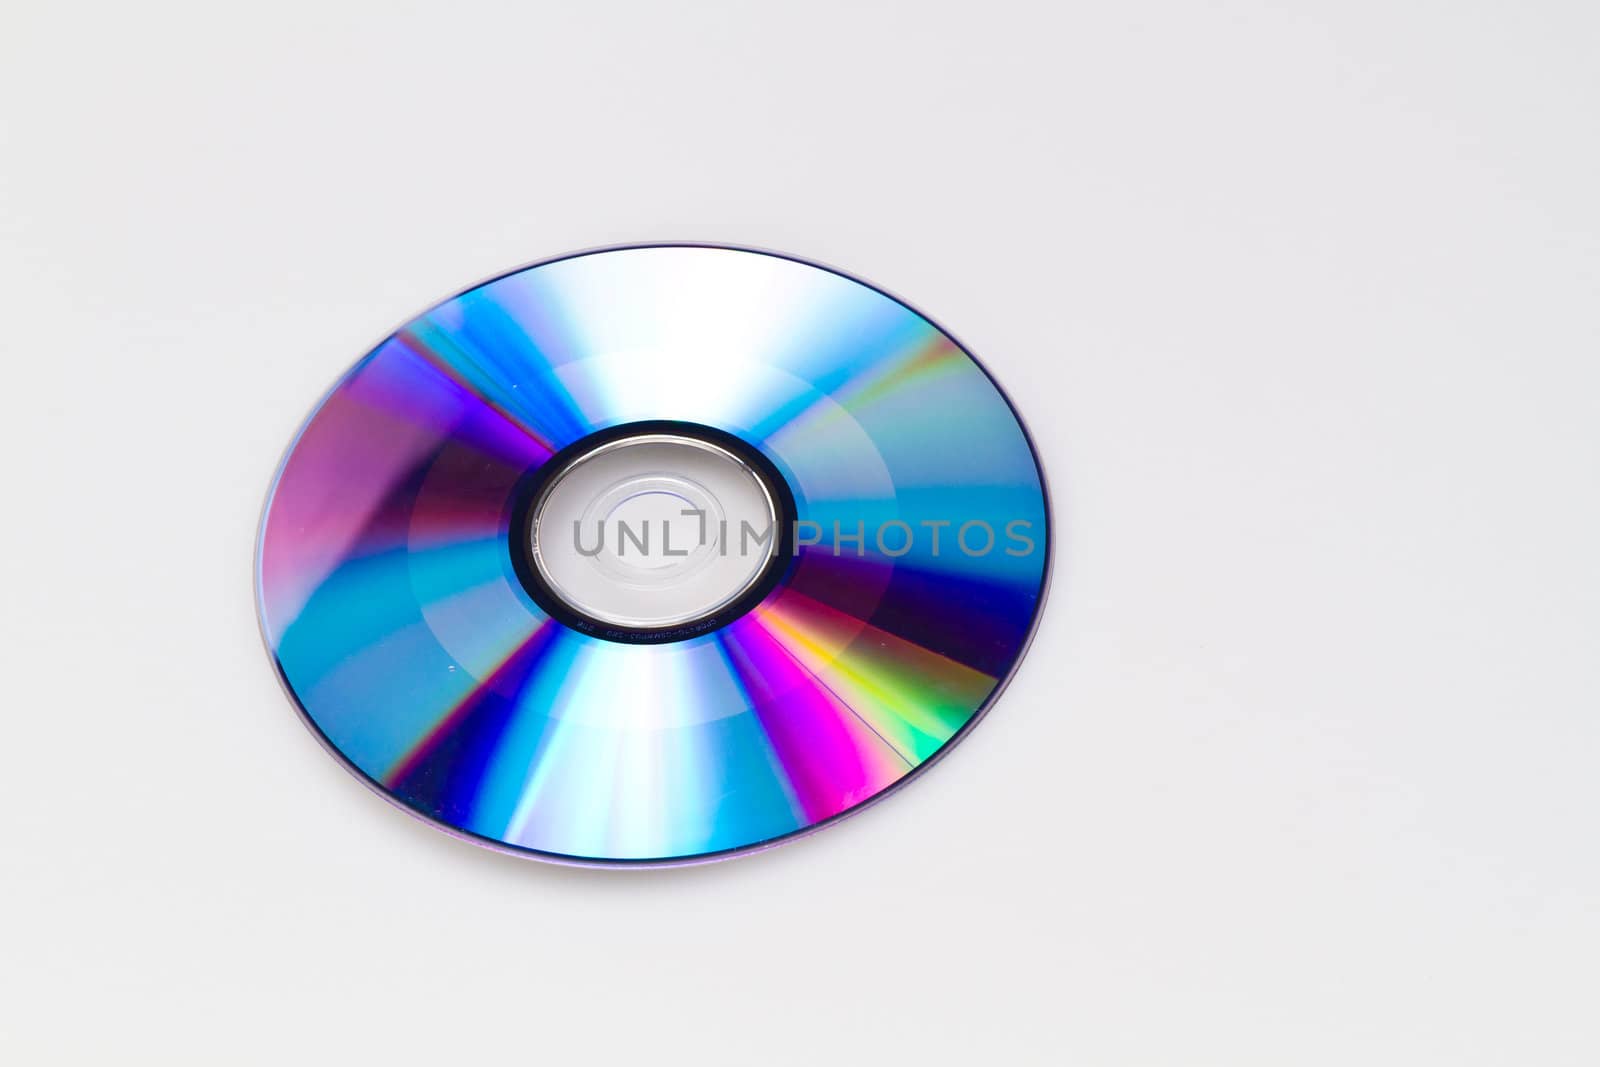 Bland dvd on white background with its reflective blue surface upward